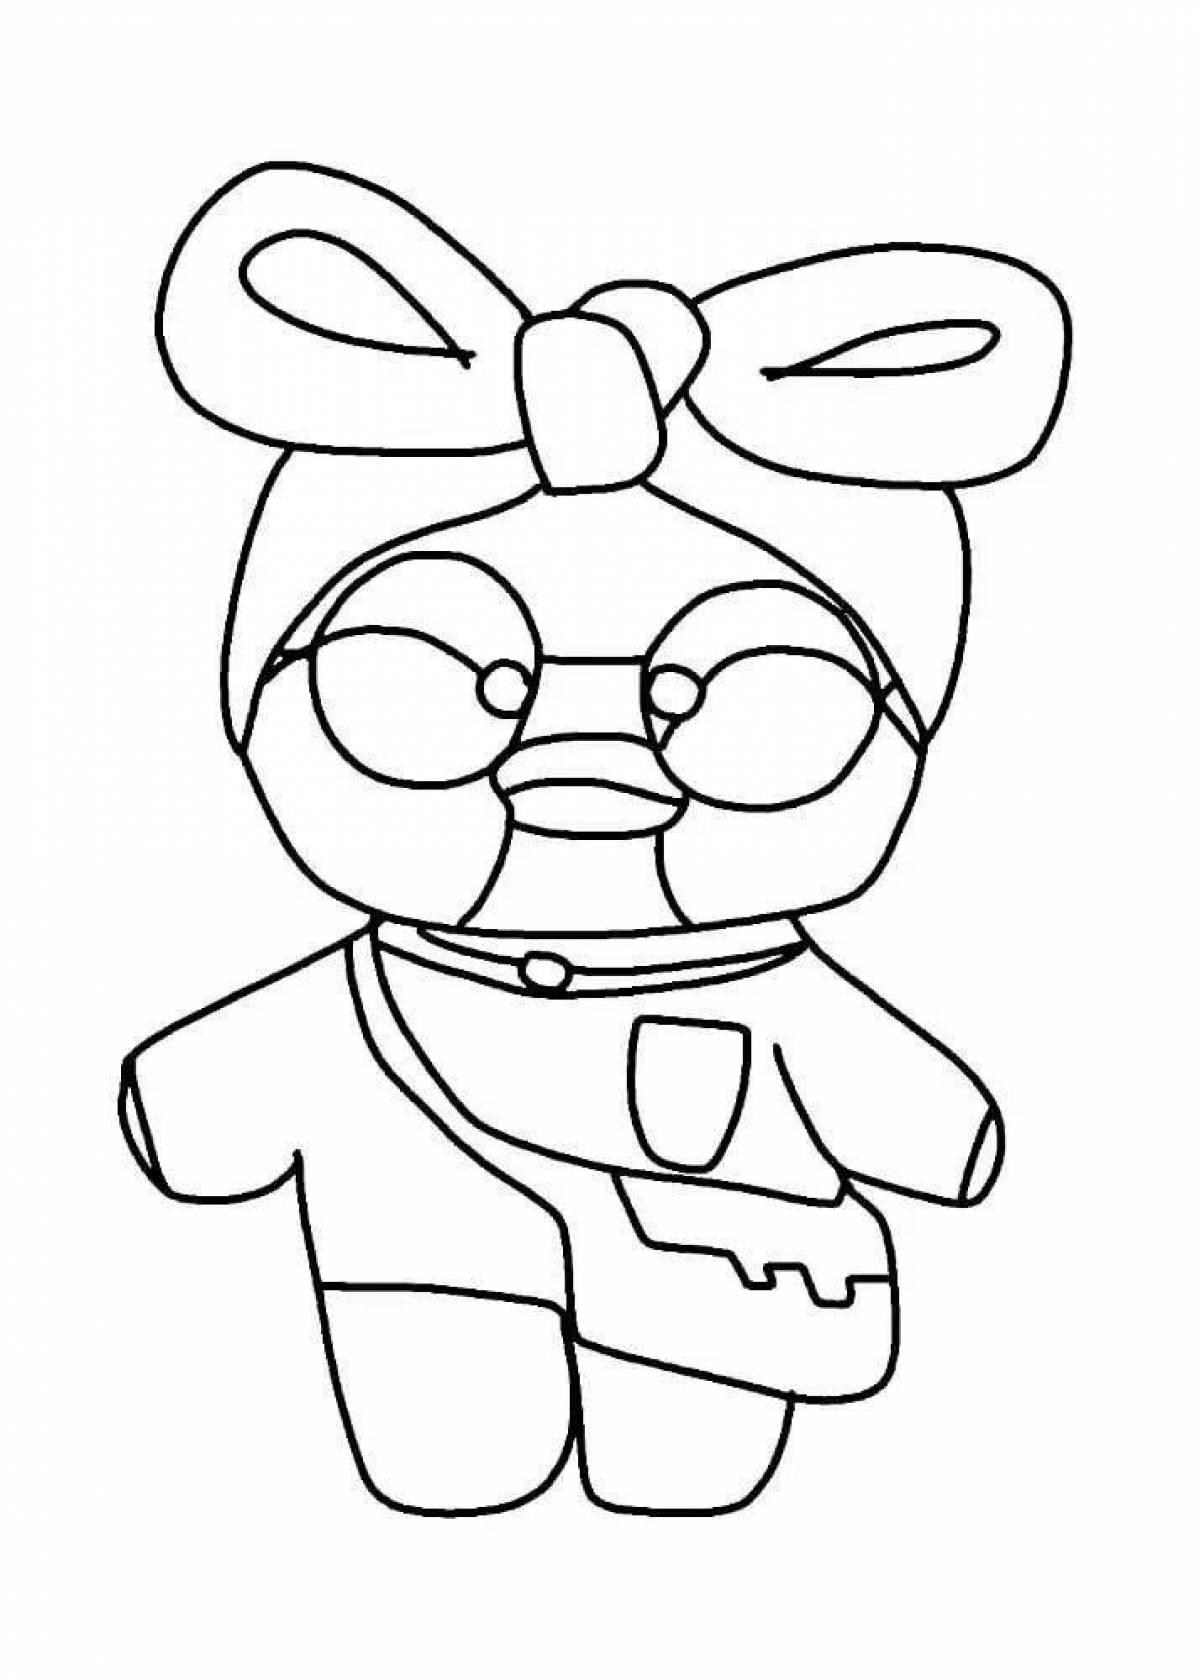 Coloring page of smart dressed duck